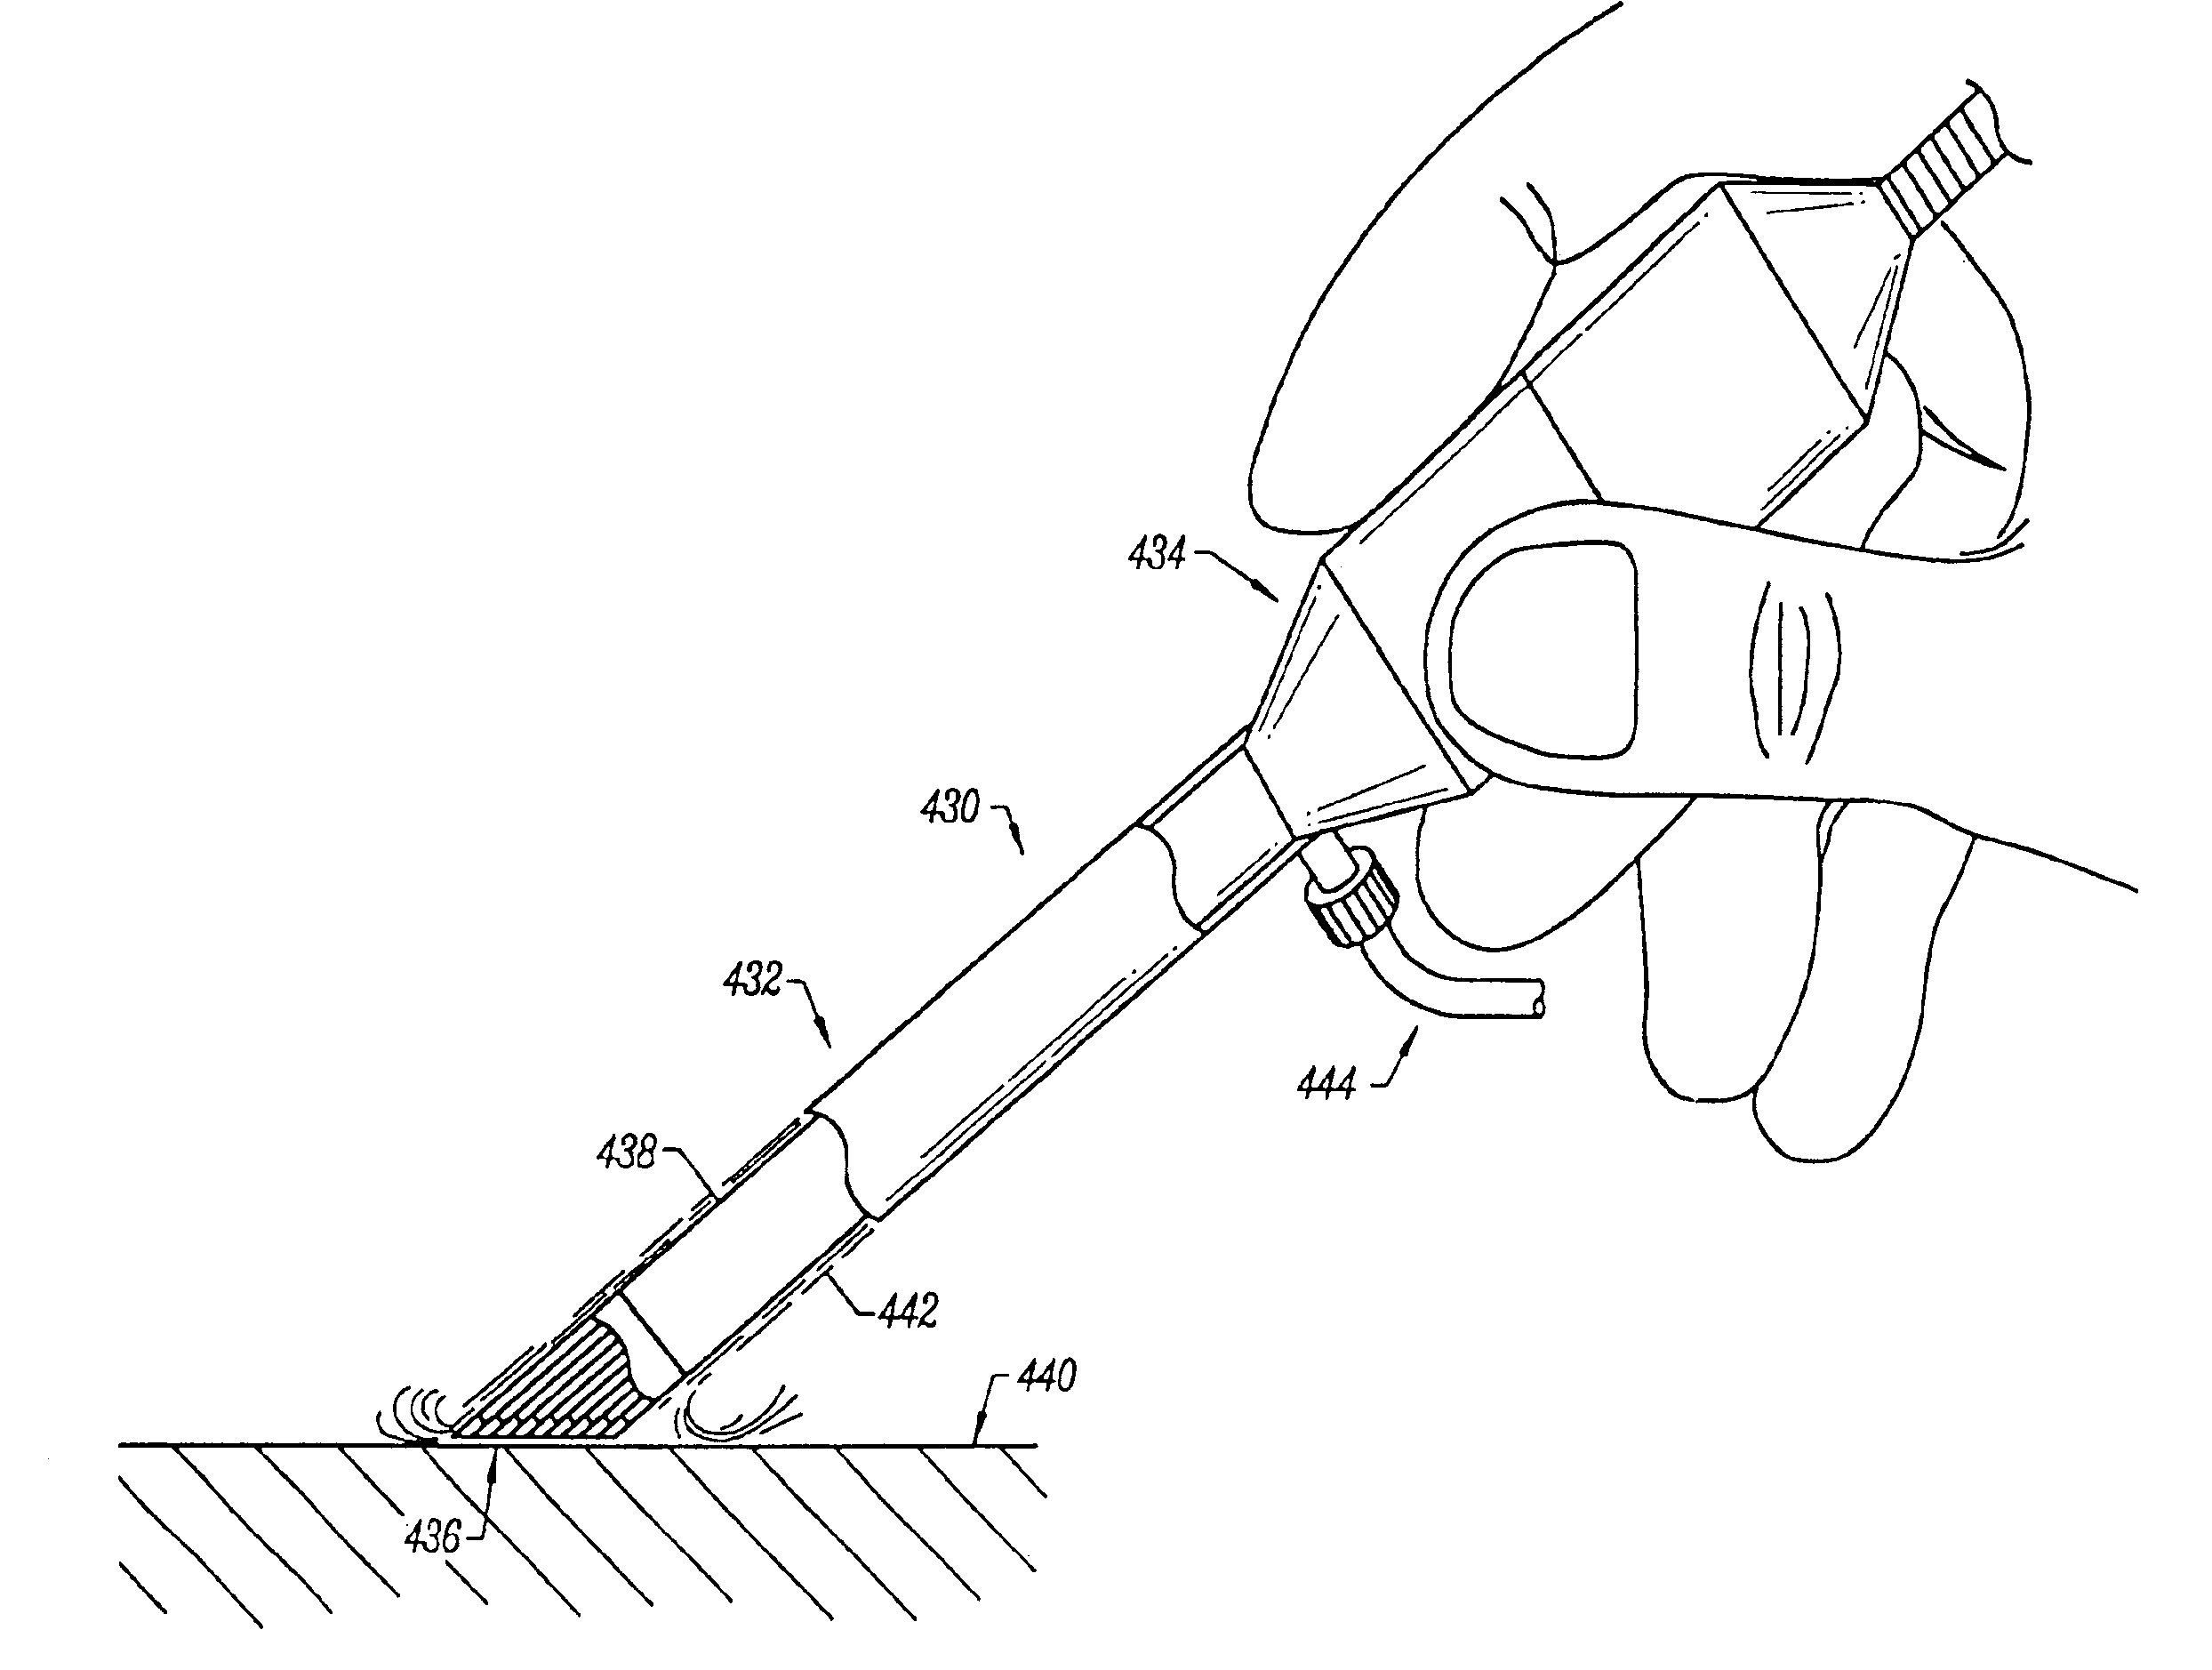 Methods for electrosurgical incisions on external skin surfaces